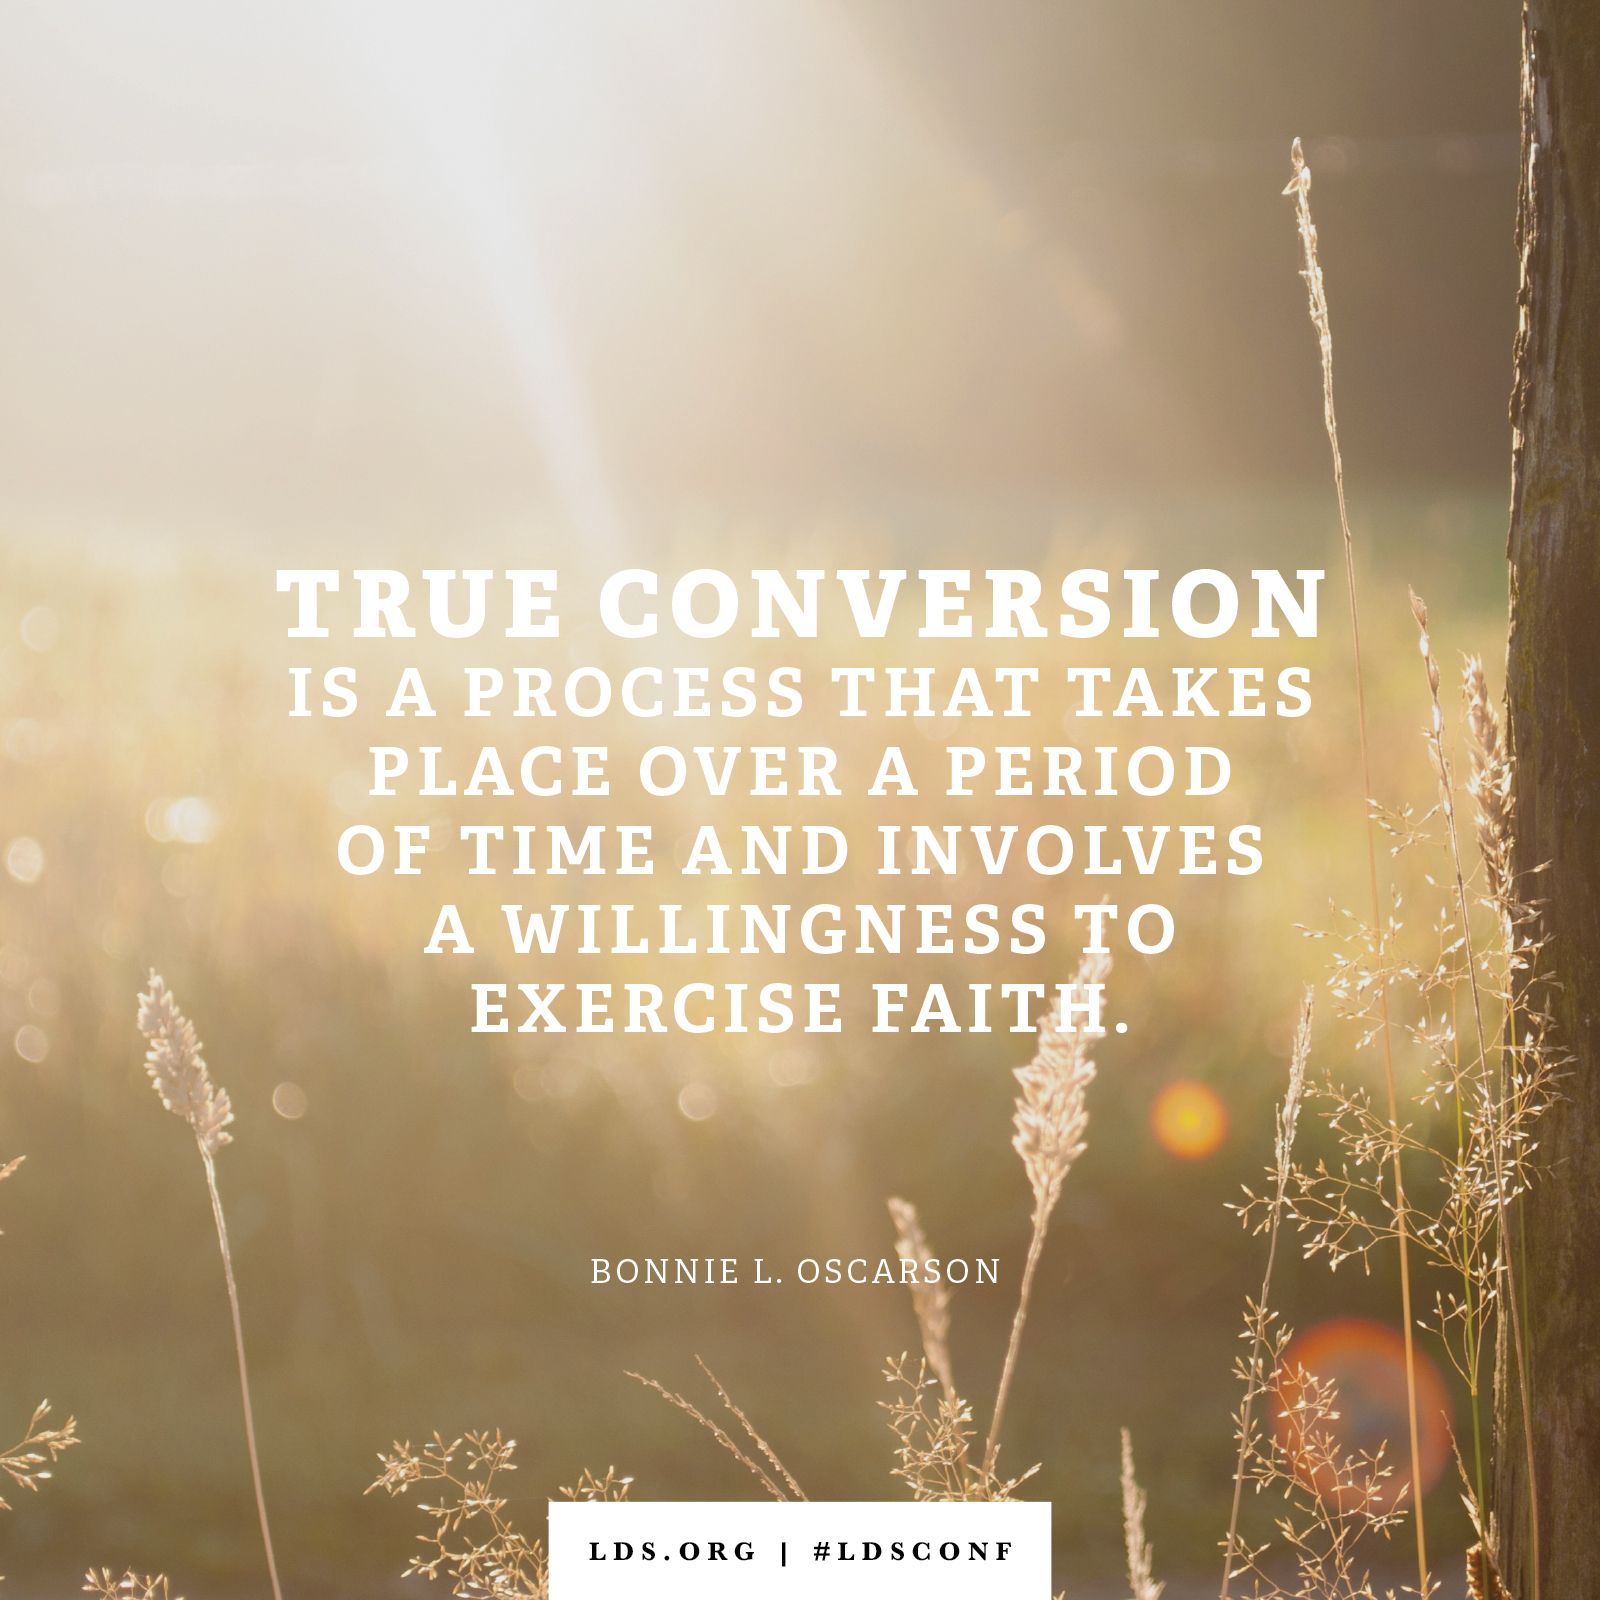 “True conversion is a process that takes place over a period of time and involves a willingness to exercise faith.” —Sister Bonnie L. Oscarson, “Do I Believe?”